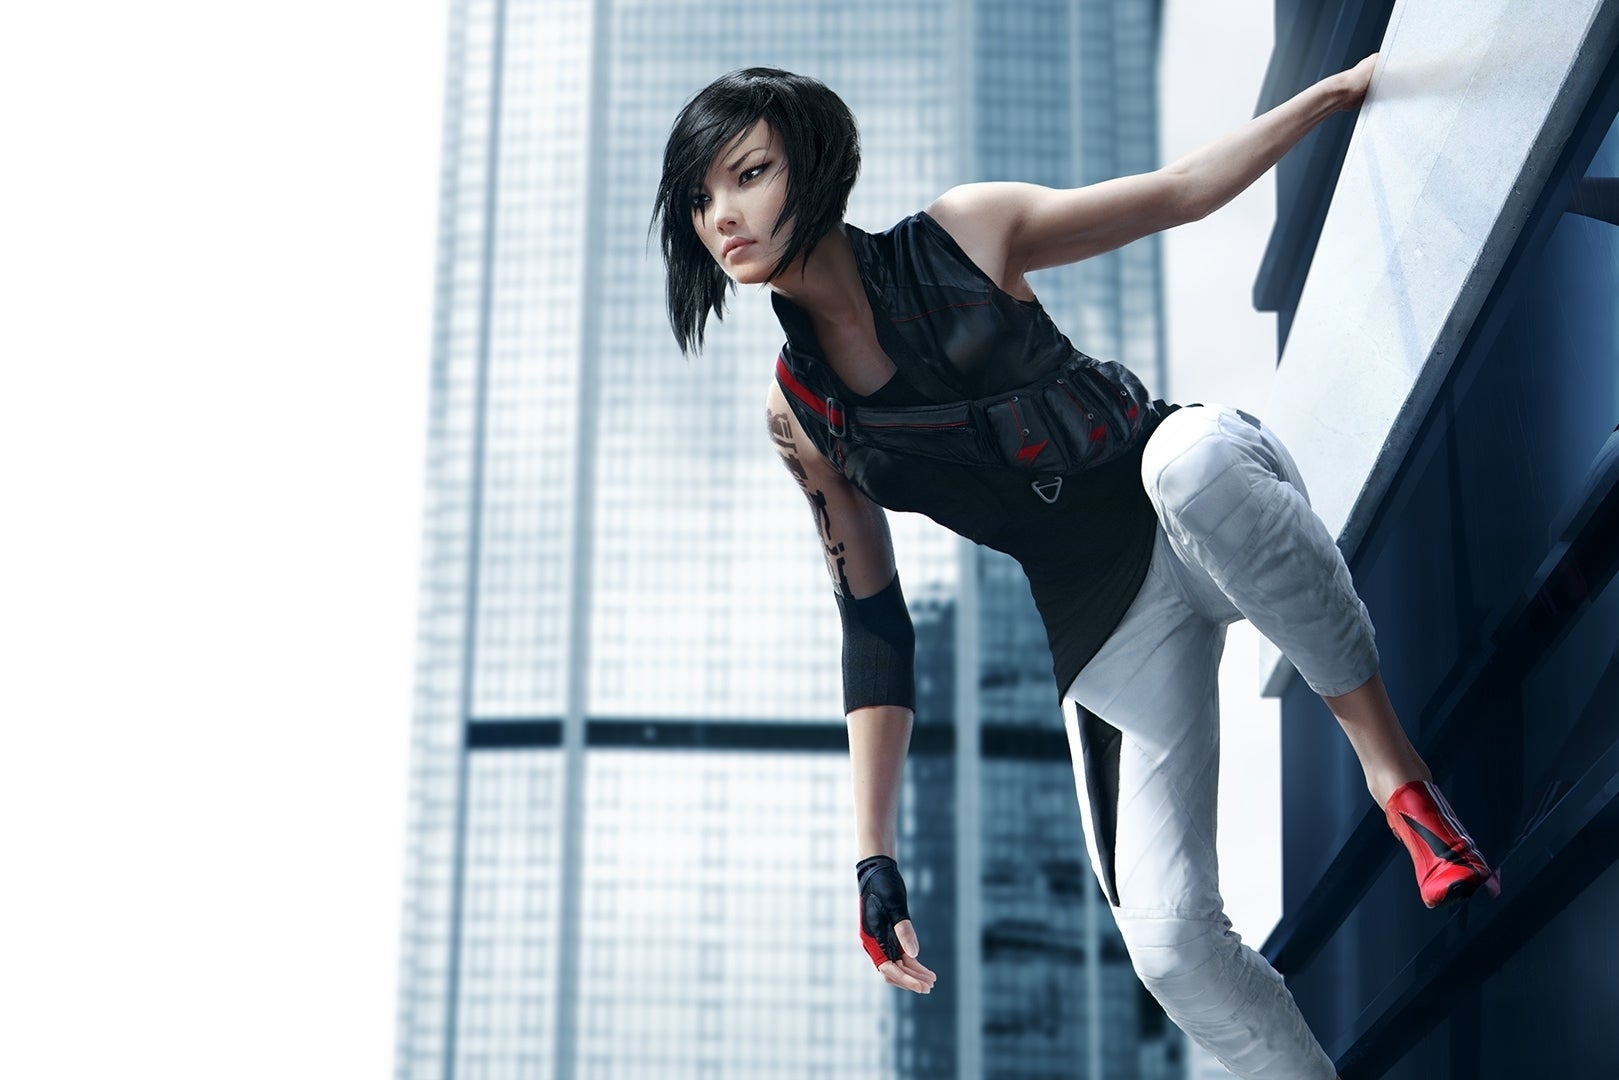 Image for Open-world Mirror's Edge isn't a shooter, but it's "very different" compared to the original, EA says